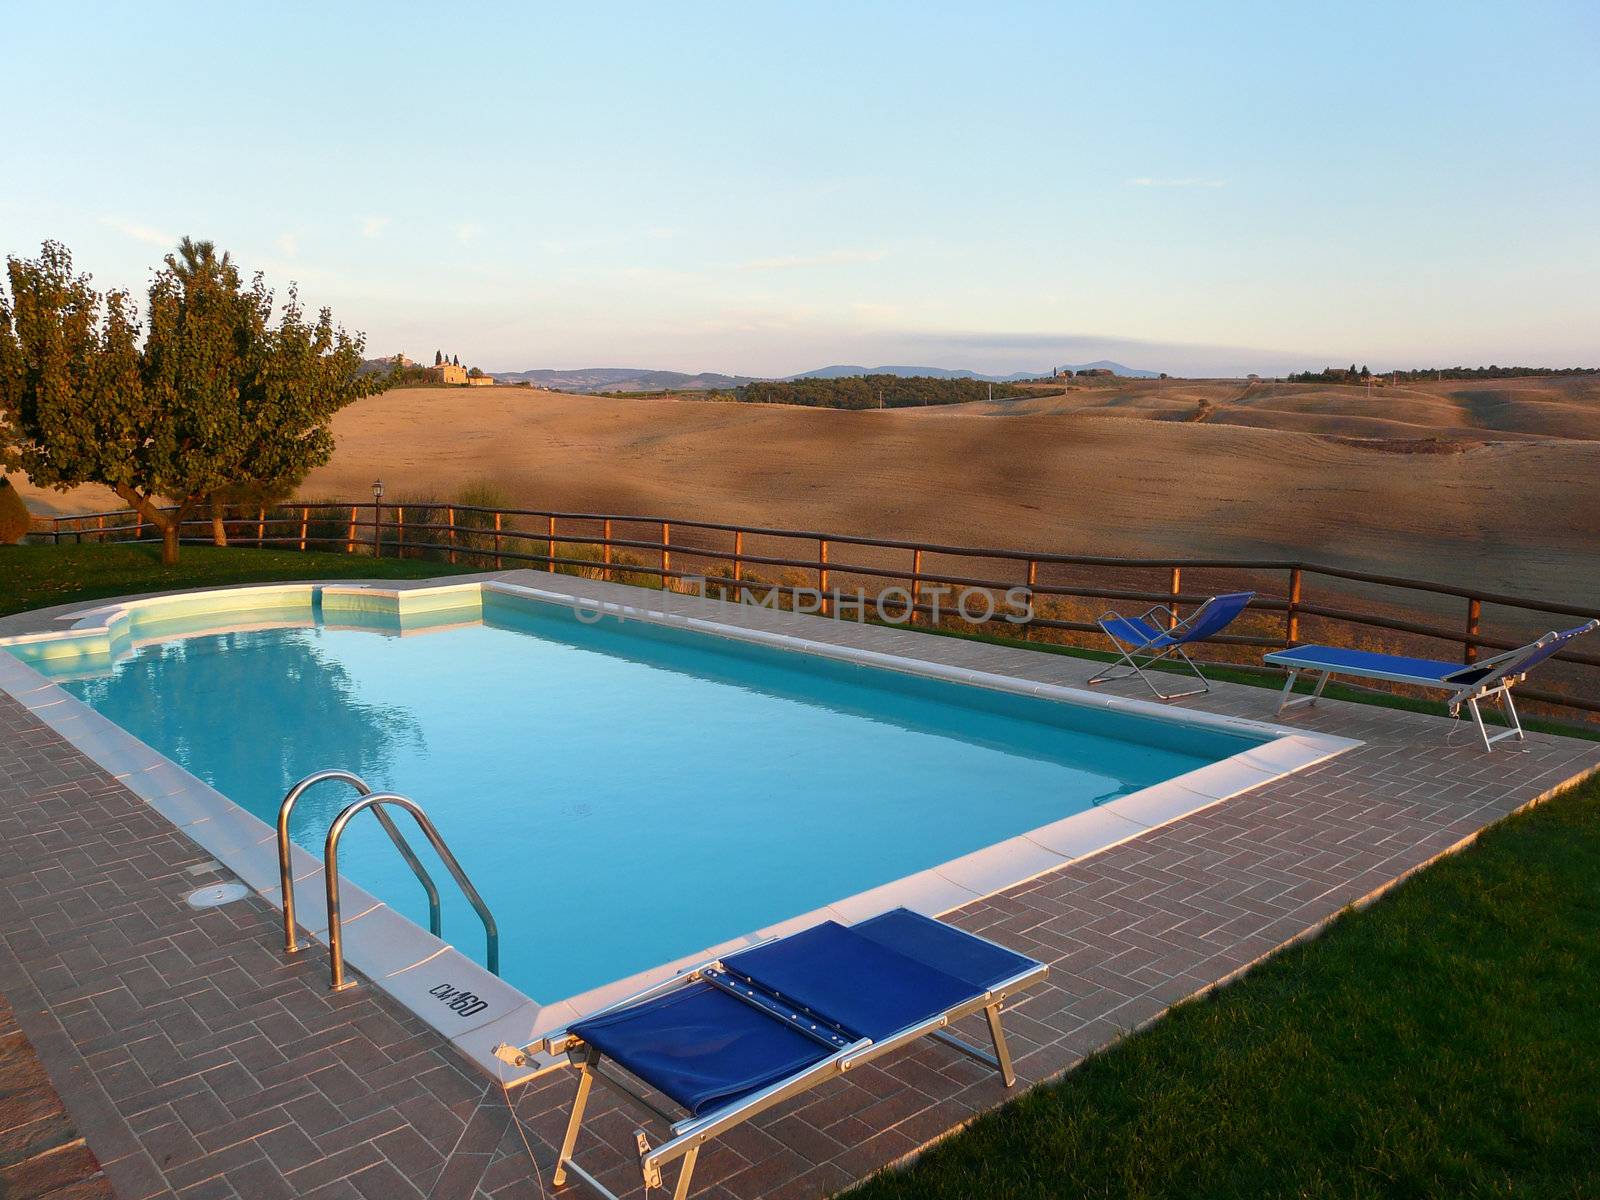 Pool in Tuscany by pljvv